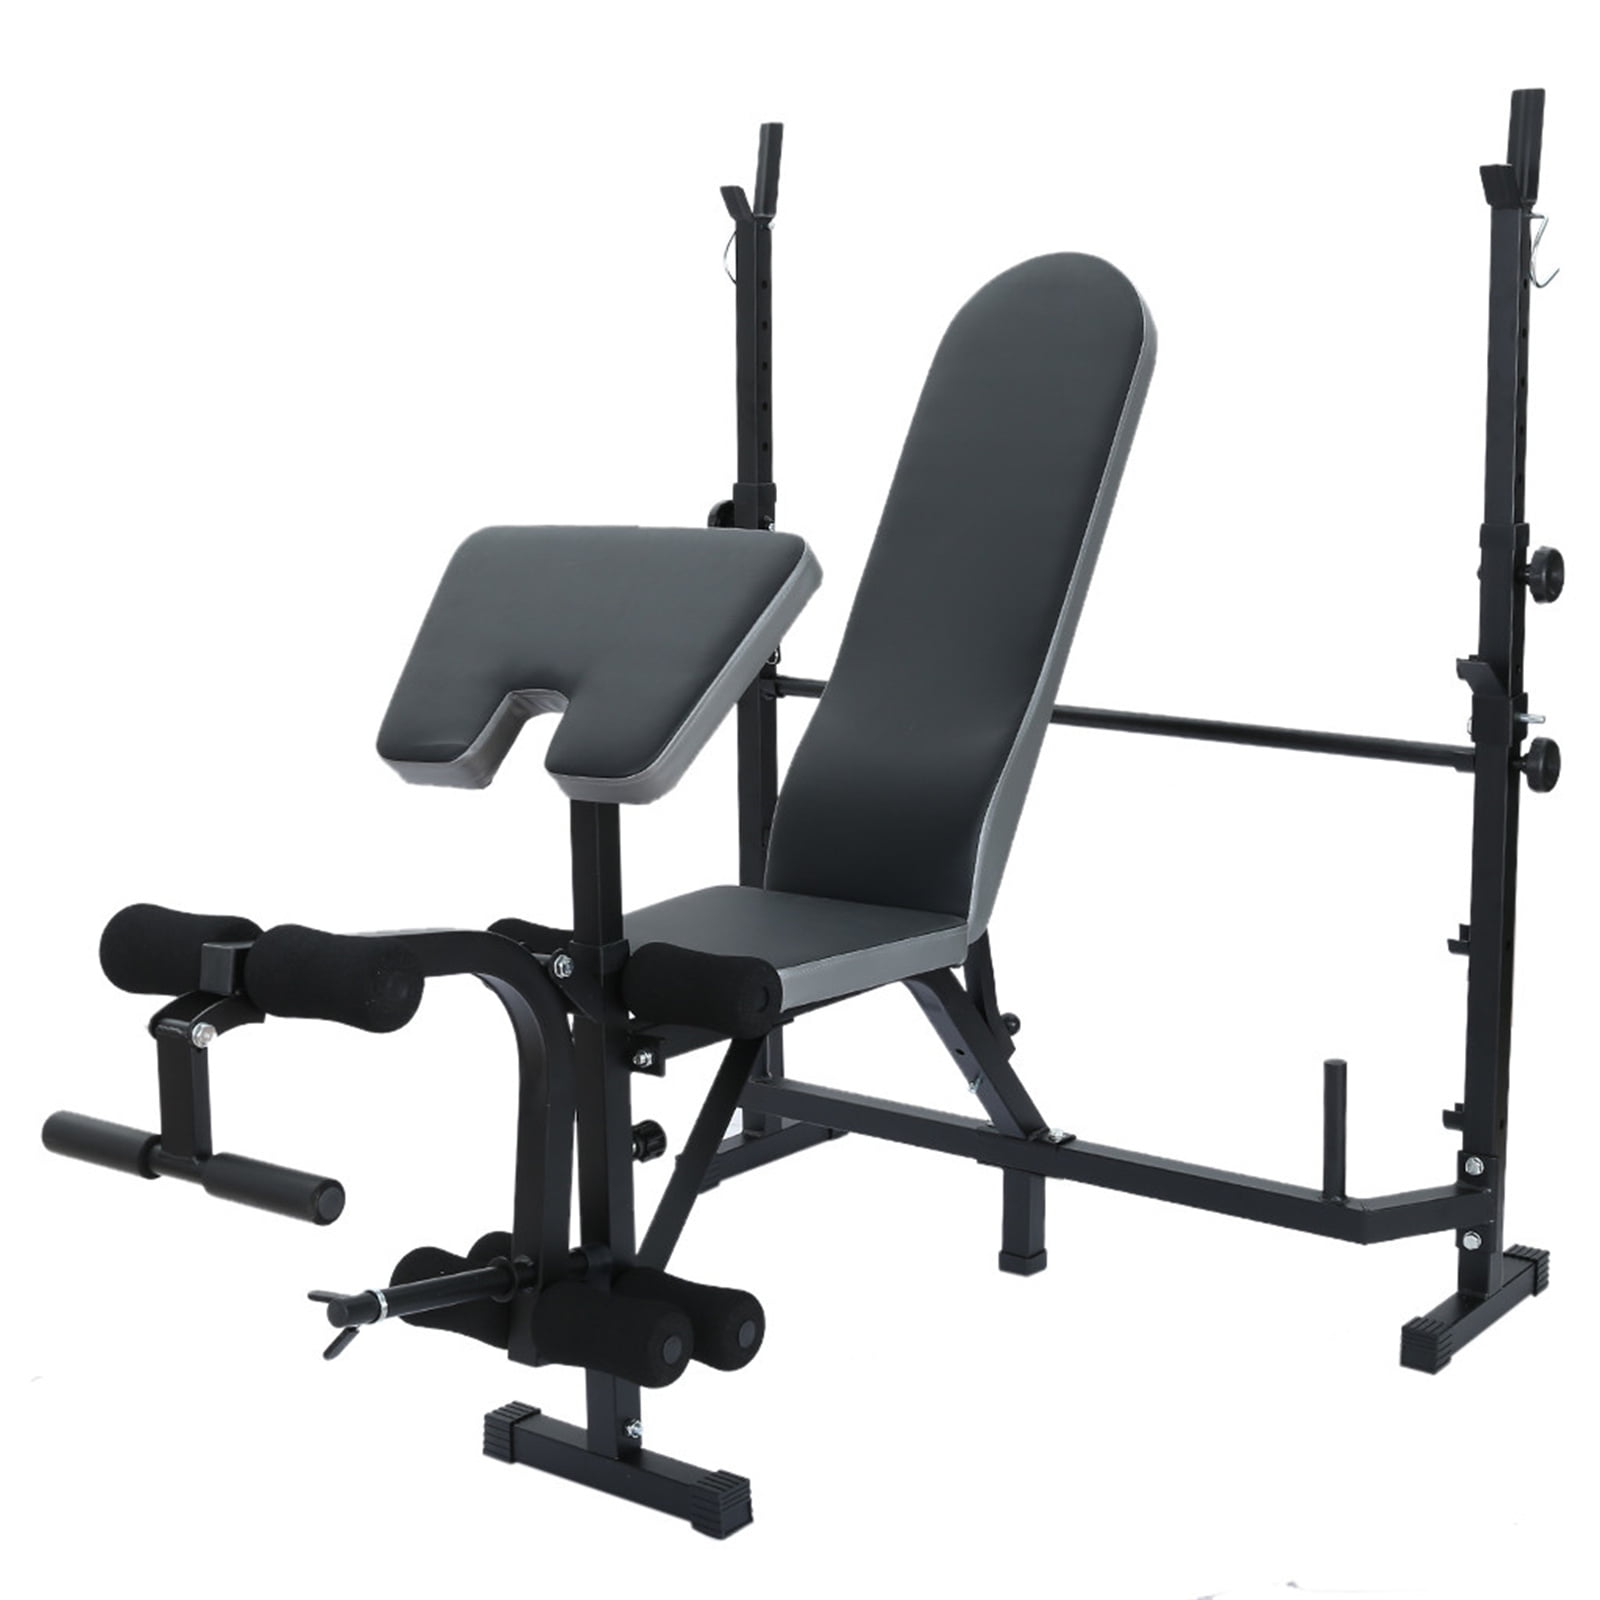 Details about   Yes4All Adjustable Weight Bench with Foldable Design for Full Body Workout 